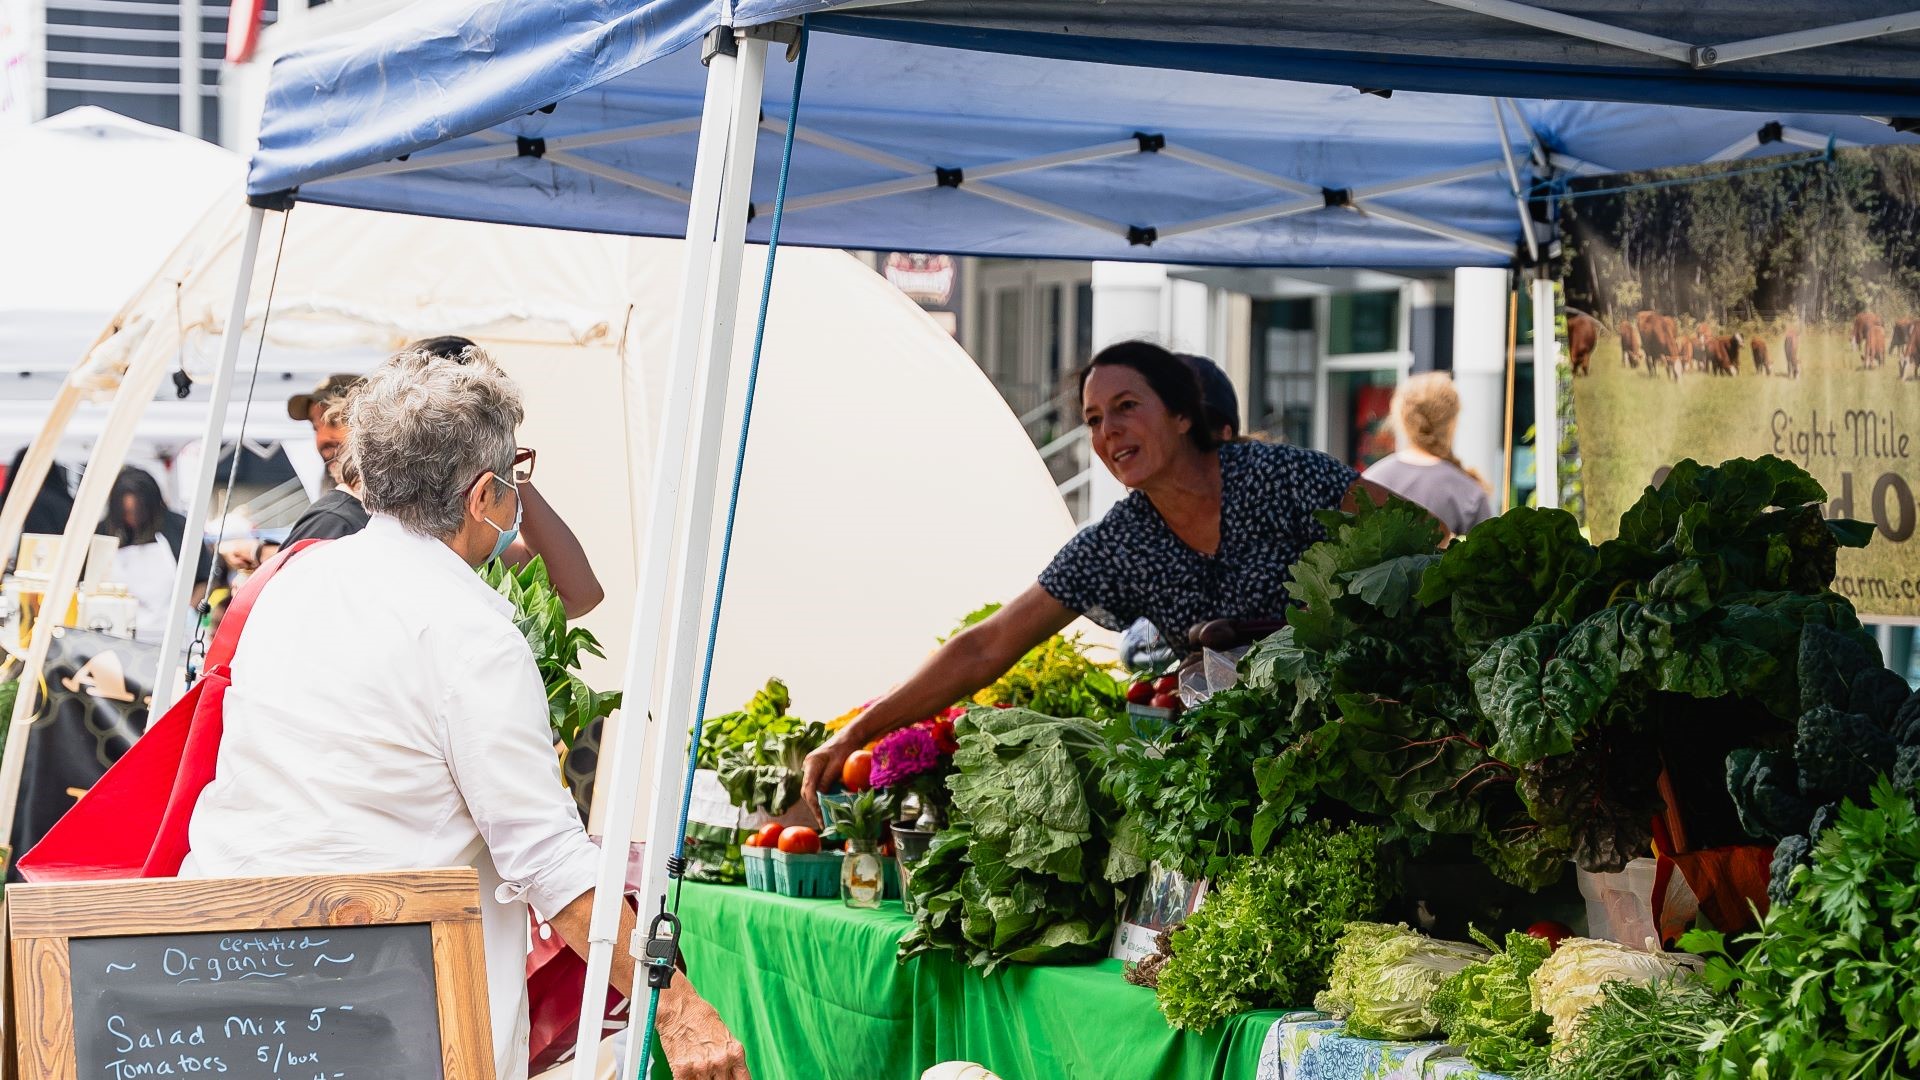 Customers patronizing a farm stand